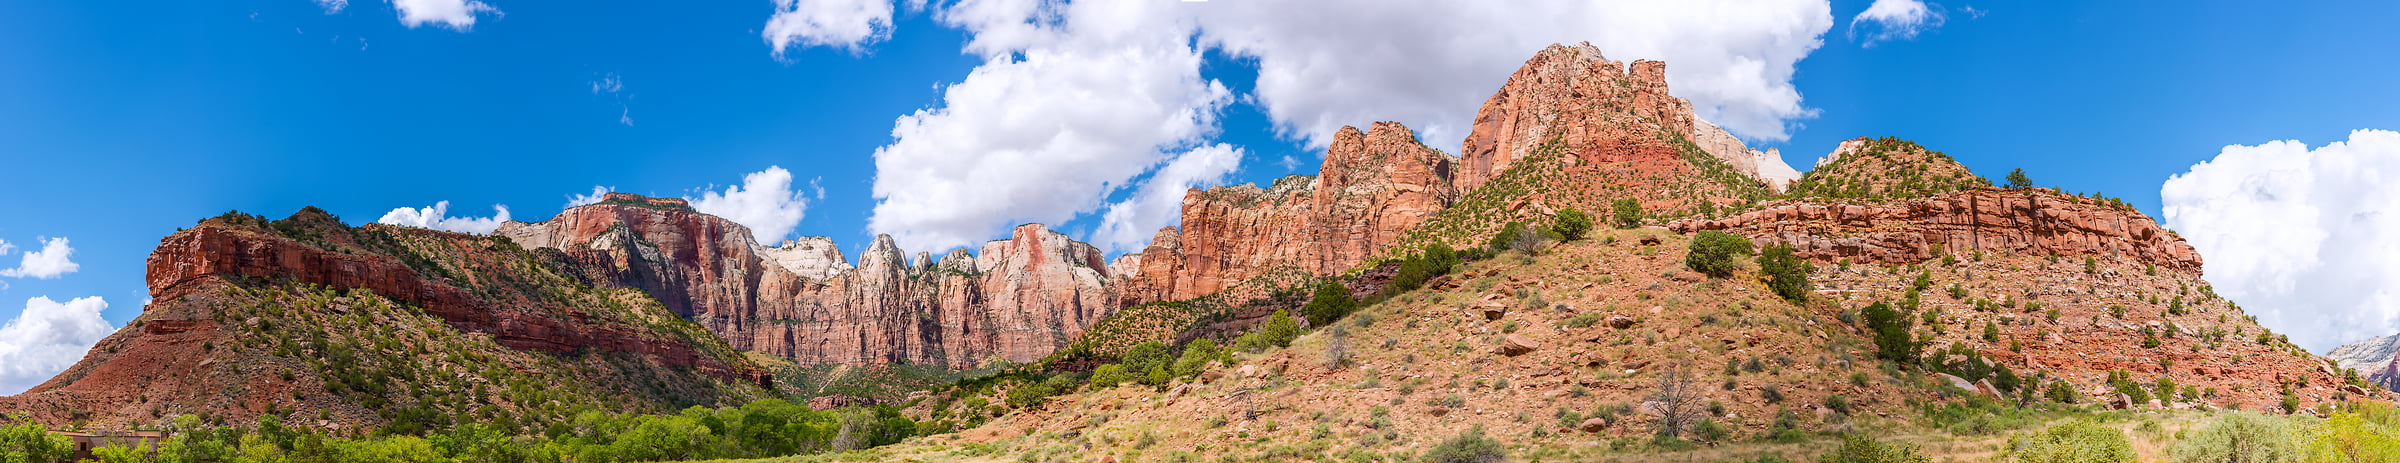 527 megapixels! A very high resolution, large-format VAST photo print of Zion National Park; panorama photograph created by Jim Tarpo in Human History Museum, Zion National Park, Utah.